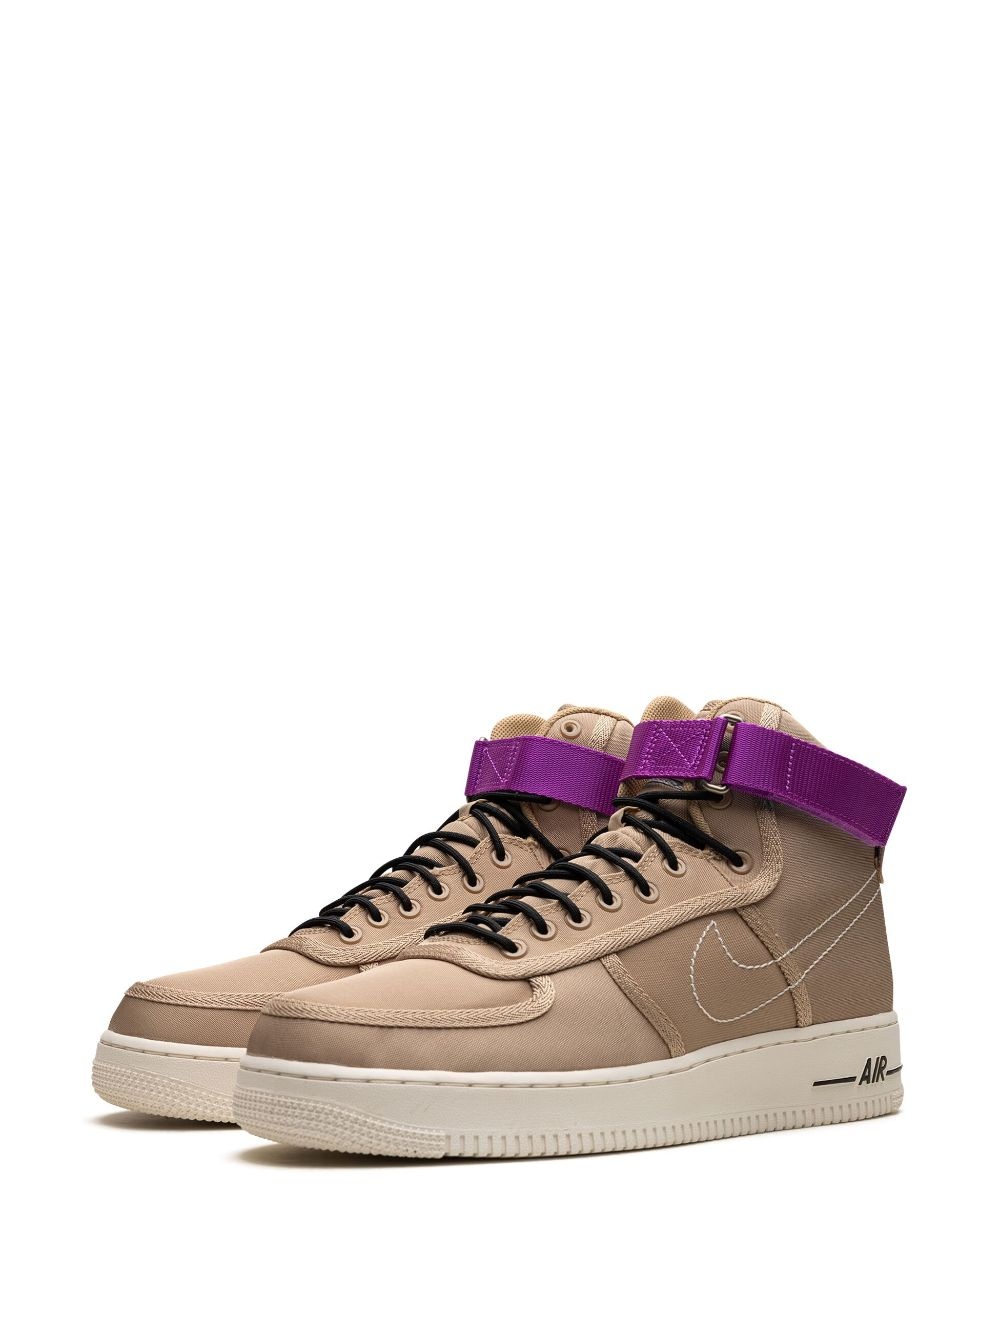 Air Force 1 High "Moving Company" sneakers - 4